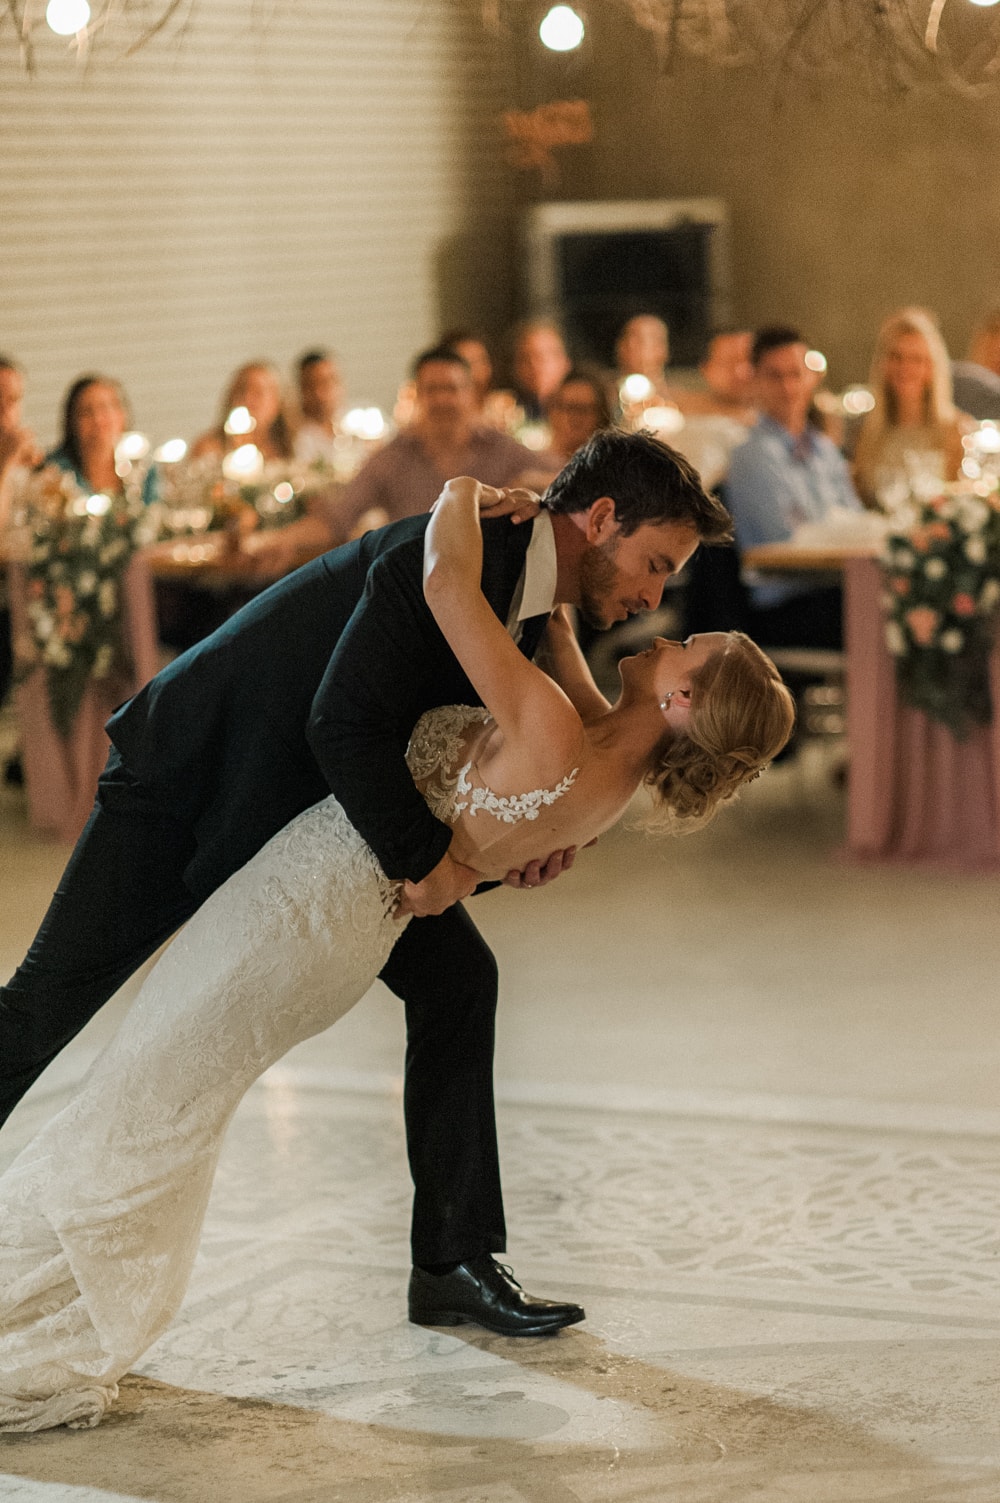 First Dance | Image: Bright Girl Photography